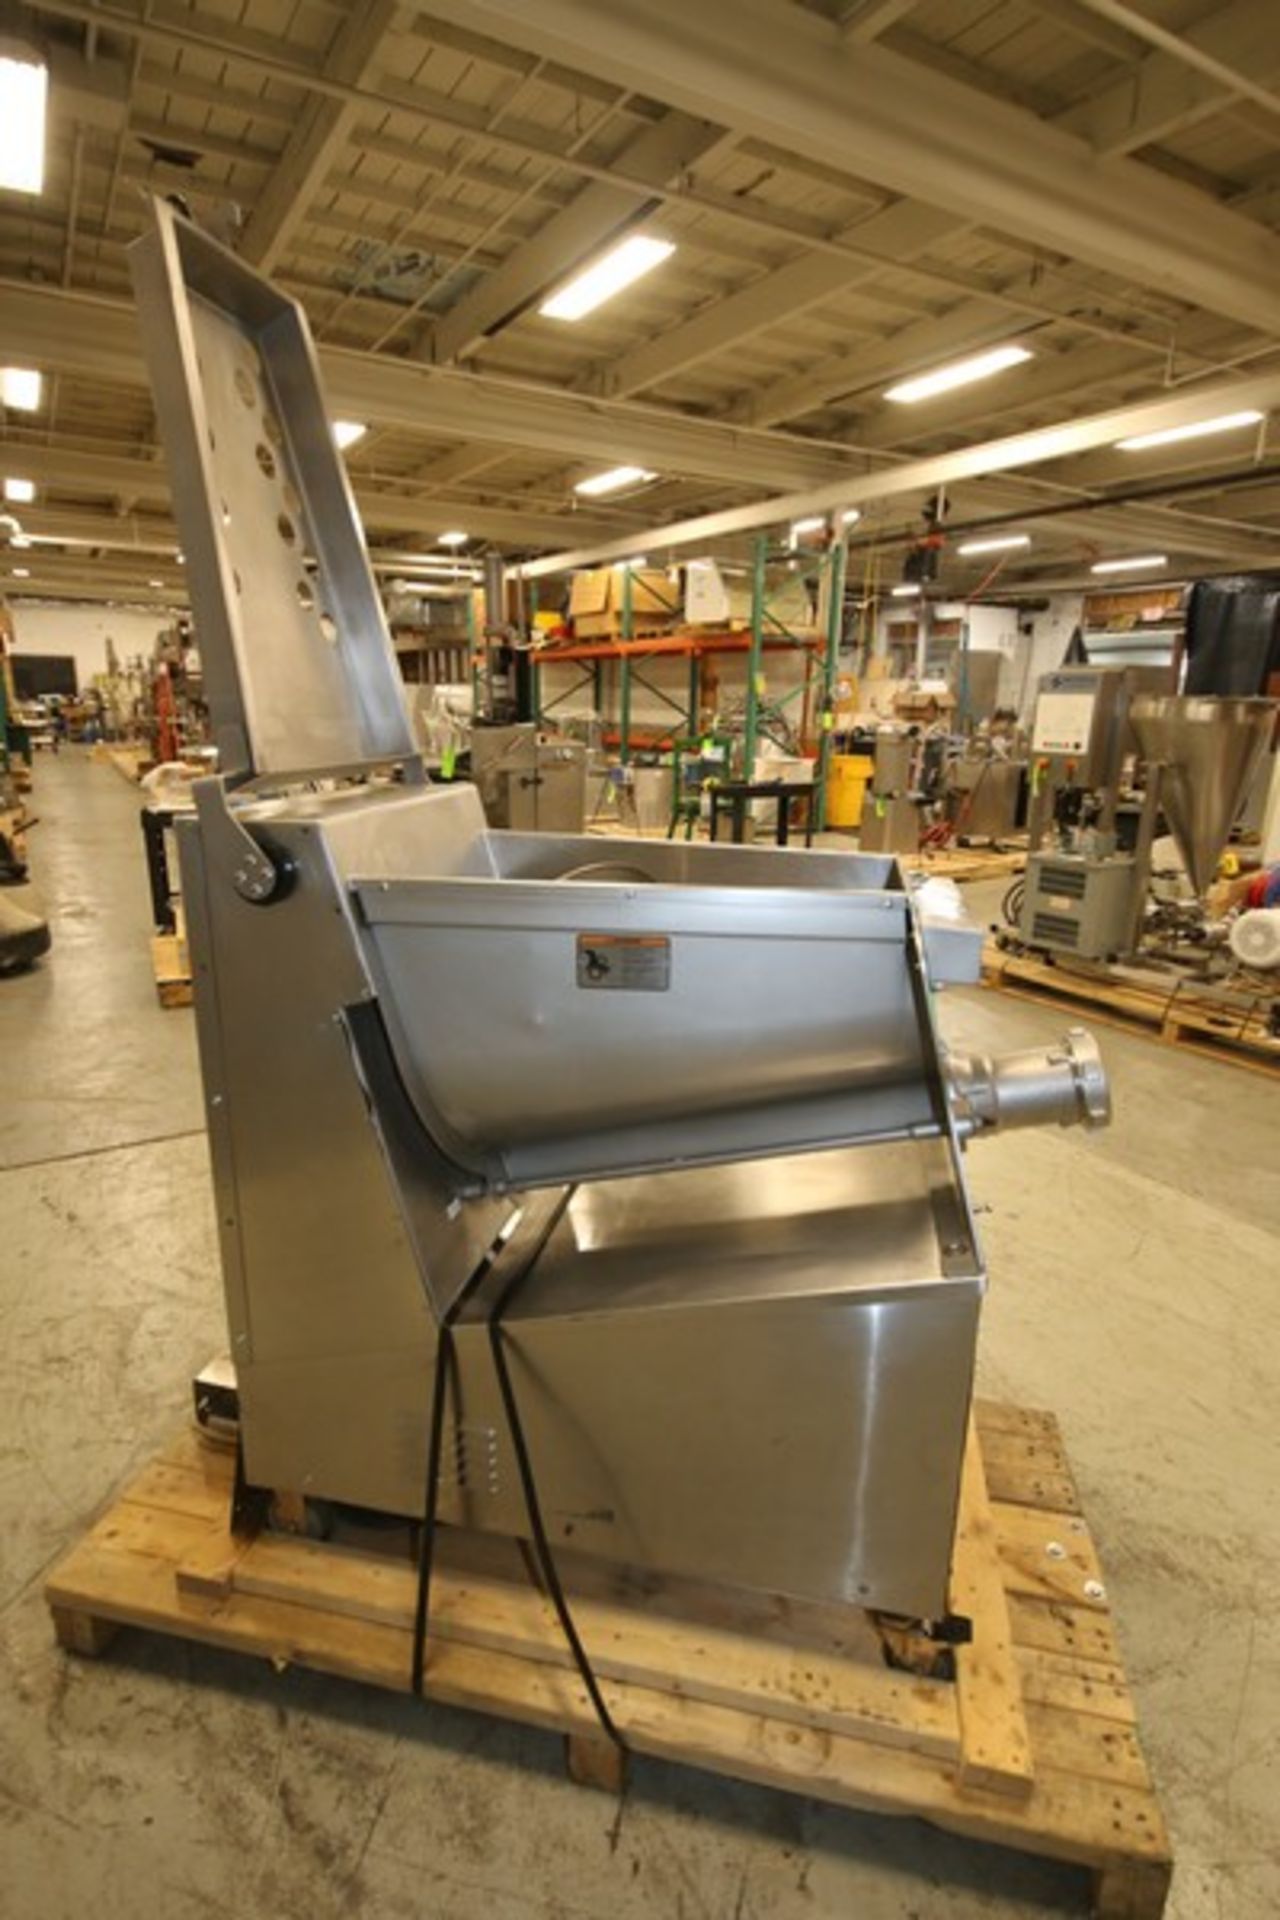 Hobart S/S 150 lb. Capacity Portable Meat Mixer / Grinder, Model MG1532, SN 27-1183-453, with - Image 6 of 8